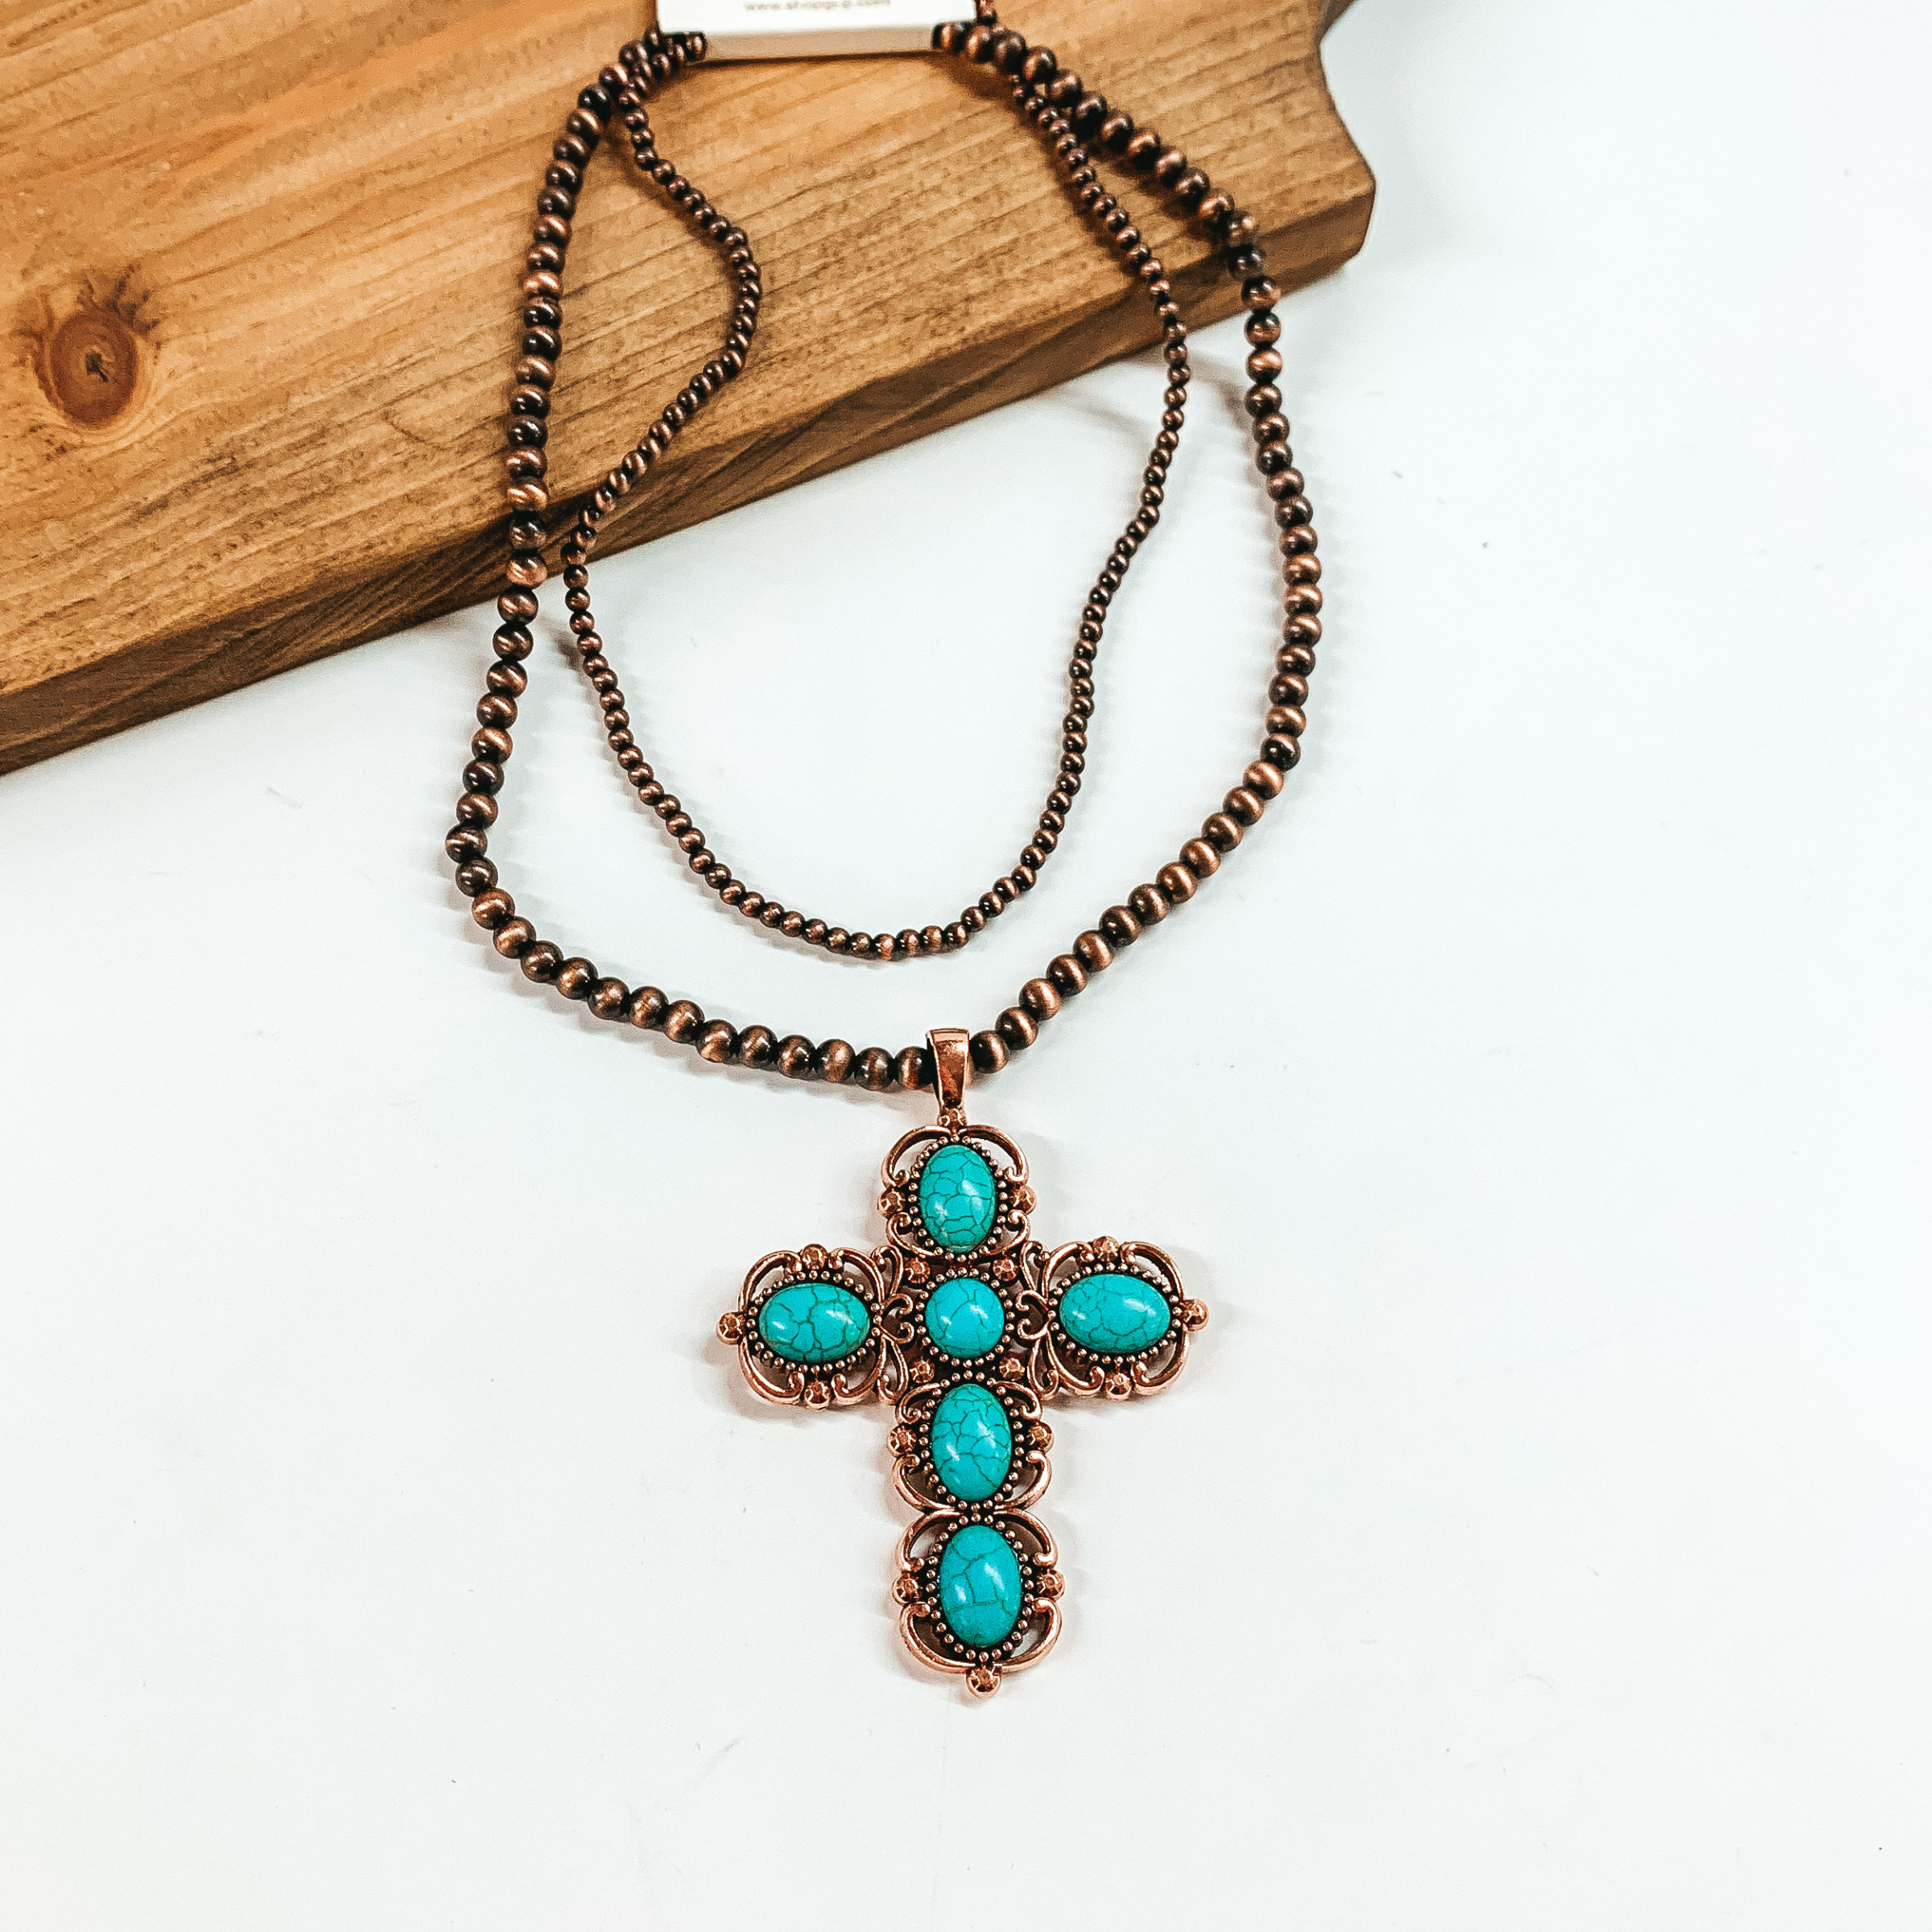 Two strand neckace with different sized copper beaded strands of different lengths with a cross pendant that has turquoise stones. This necklace is pictured on a white background. 